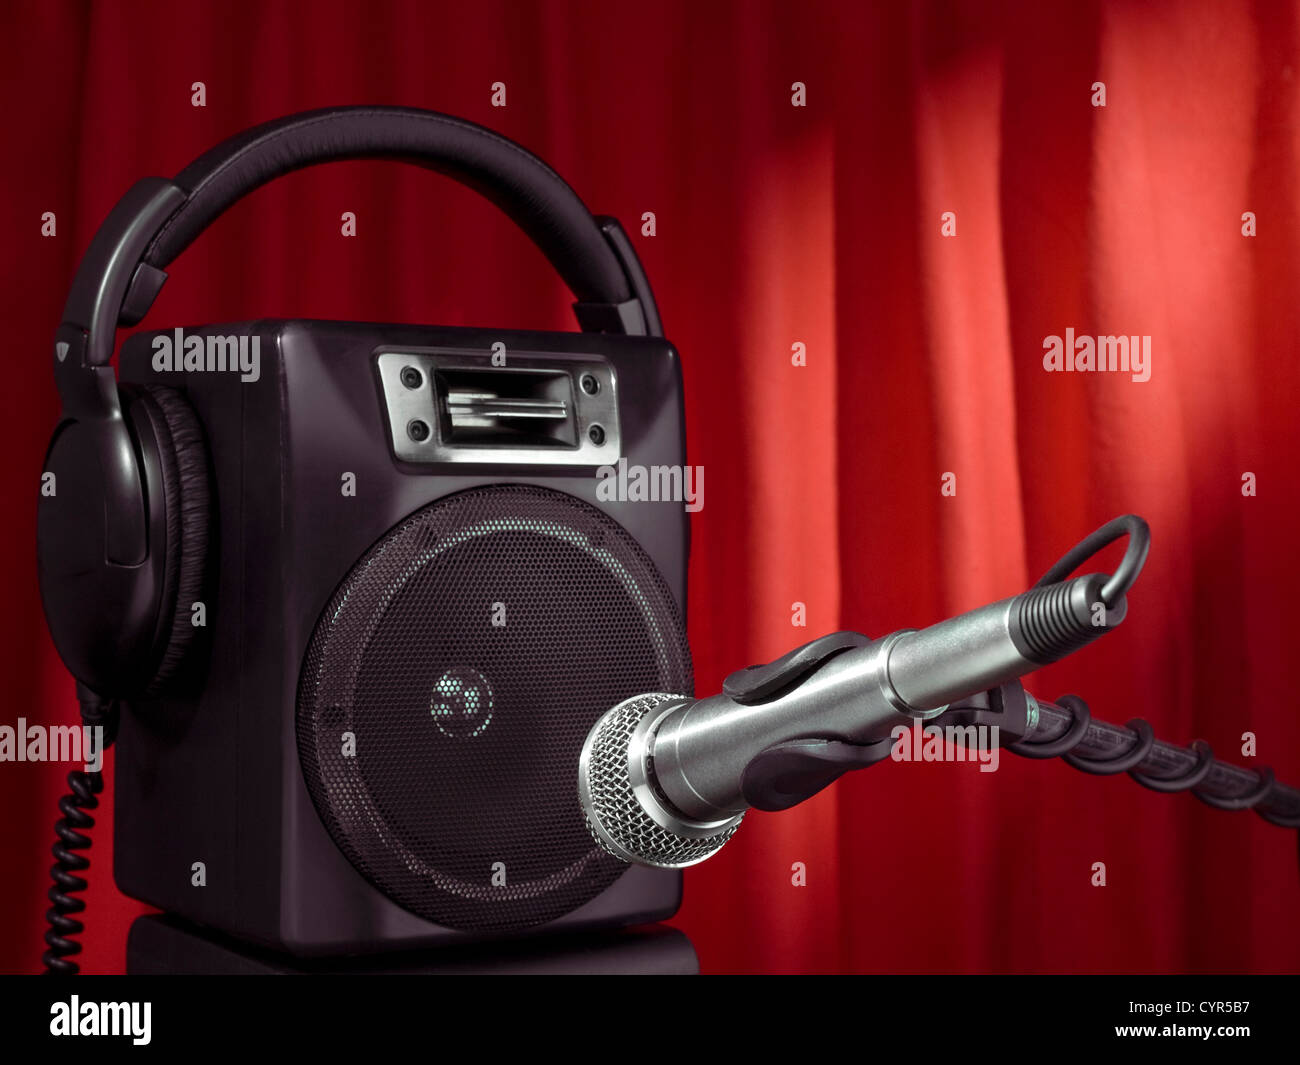 Professional microphone, headphone and speaker with a red curtain on the background. Stock Photo